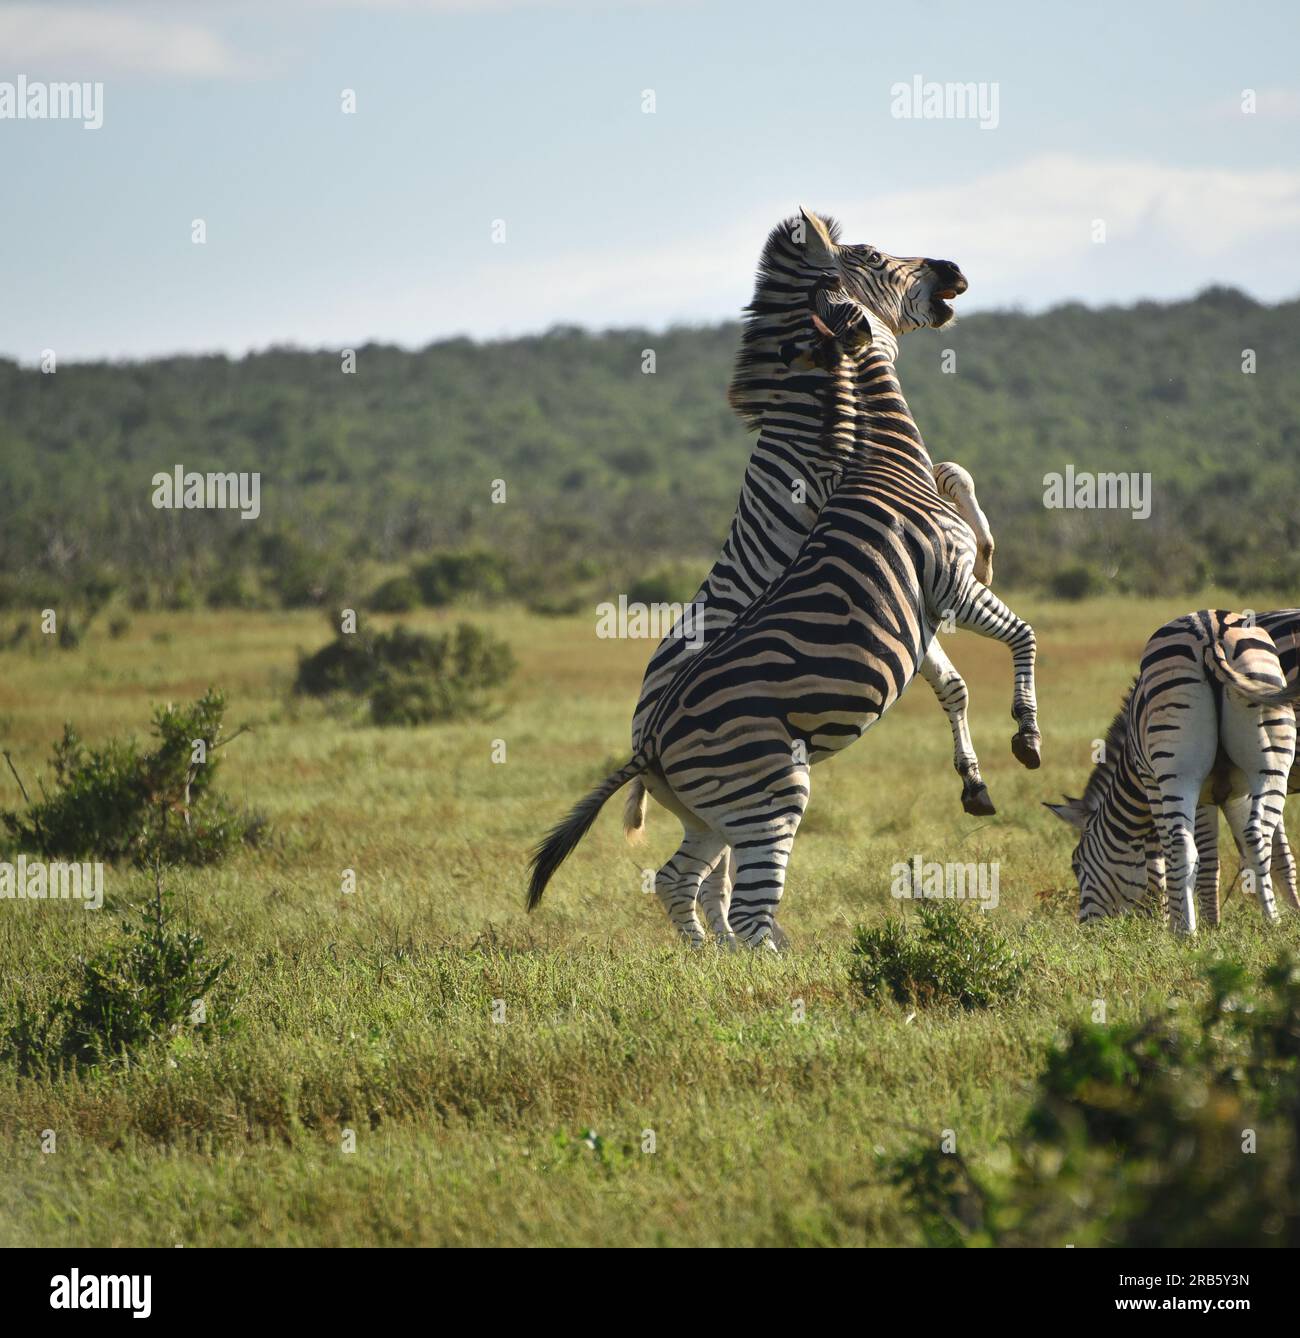 Close up of wild Zebras rearing up on their hind legs and fighting one another.  Shot on safari in South Africa. Stock Photo